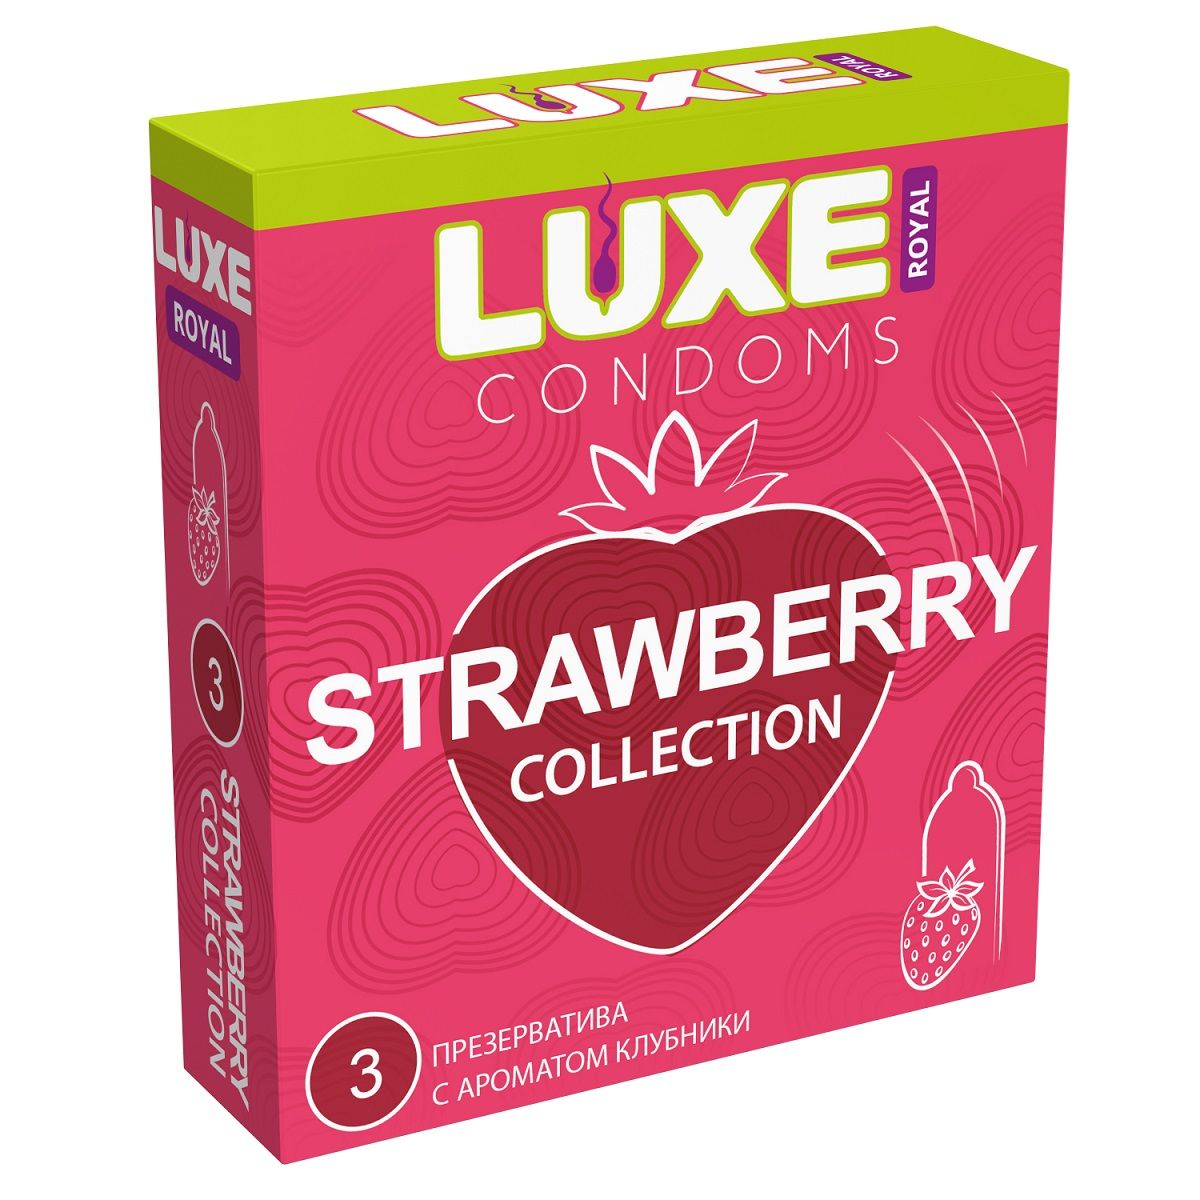     LUXE Royal Strawberry Collection - 3 .